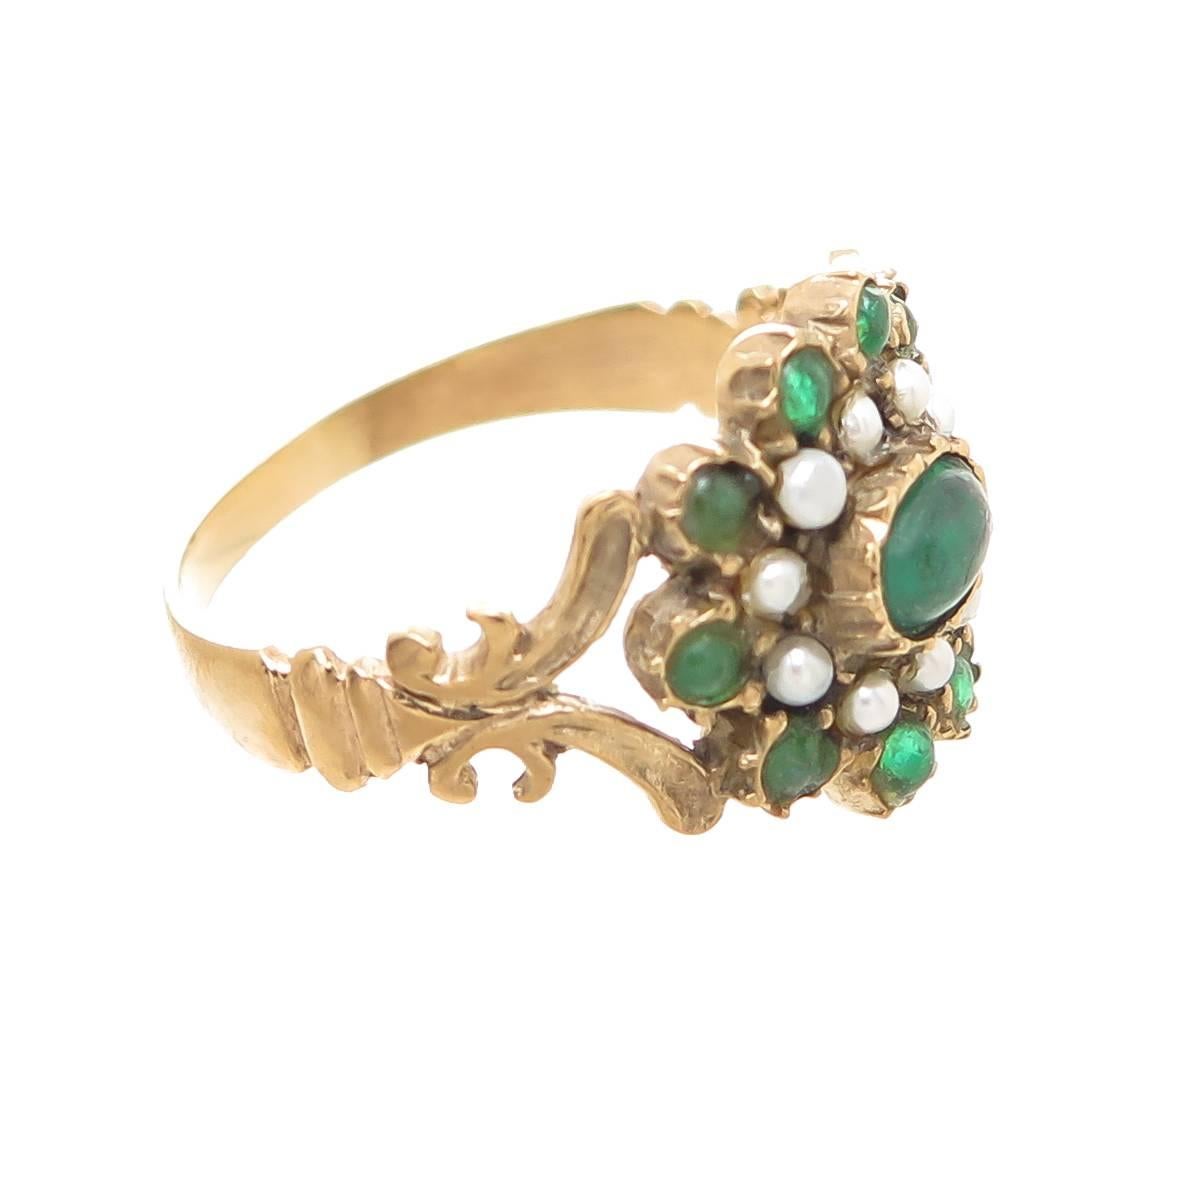 Circa 1850 15K Yellow Gold Georgian ring, set with Cabochon Emeralds and split Pearls. The top of the ring measures 5/8 X 1/2 inch. Finger size = 8 3/4. Very good to excellent condition. 